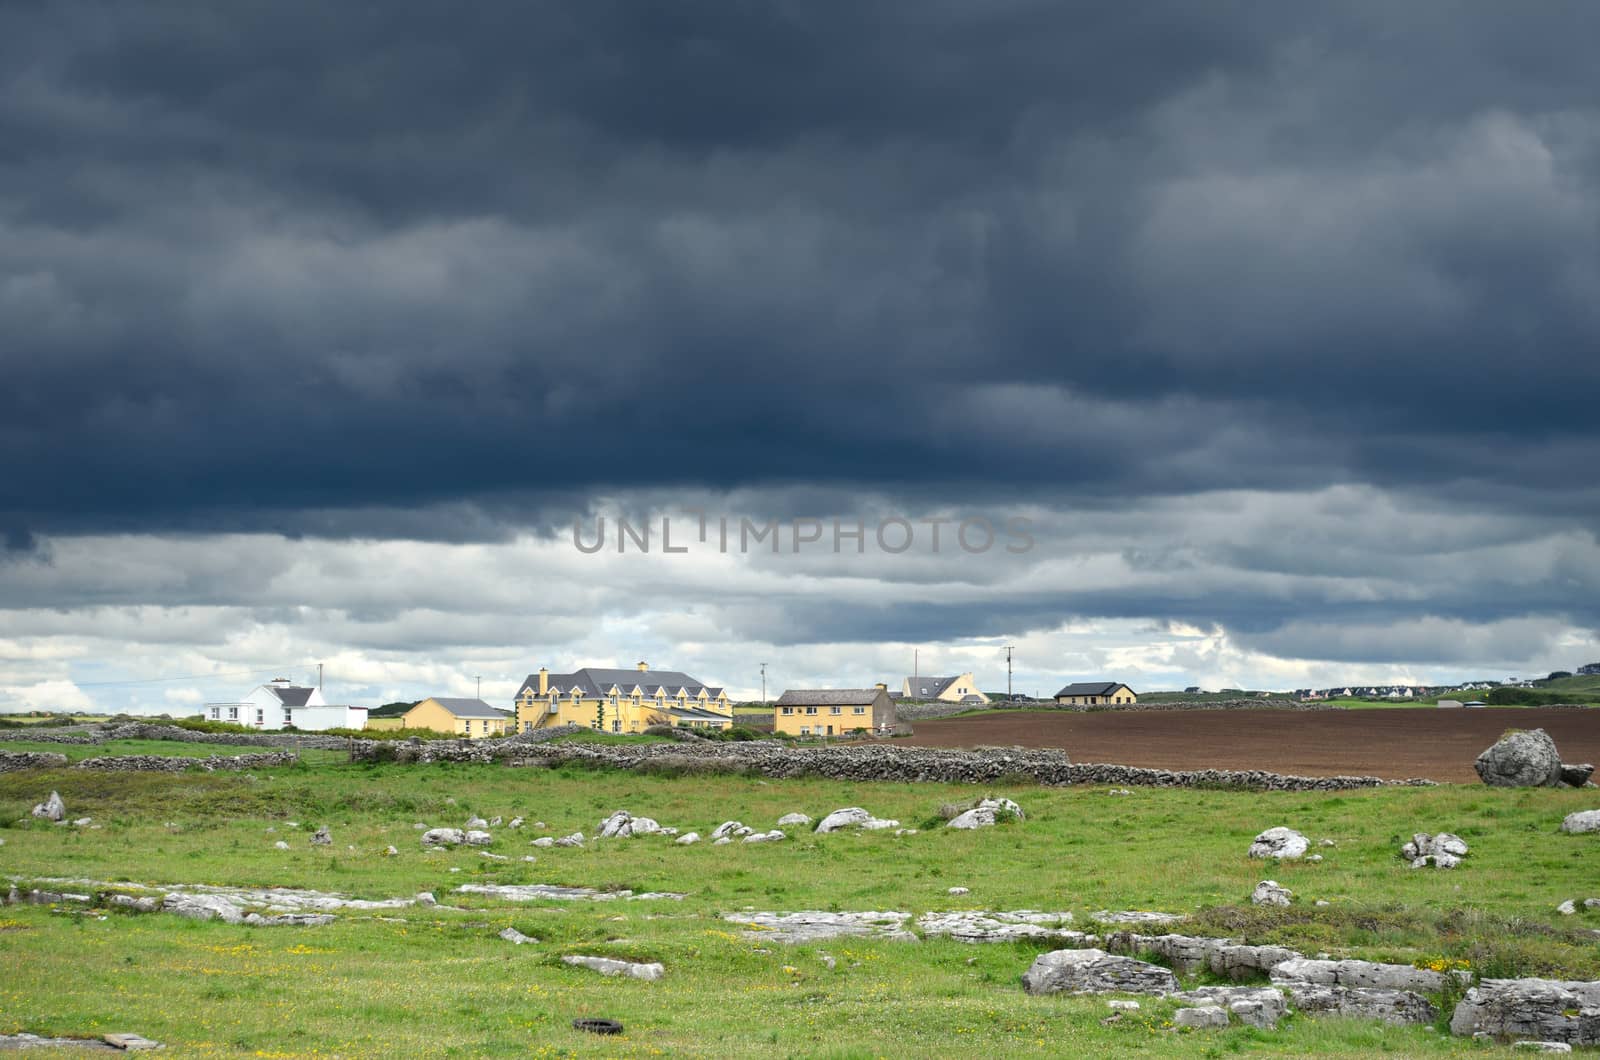 Black clouds and a stormy sky over a small town in county Clare in eastern Ireland.